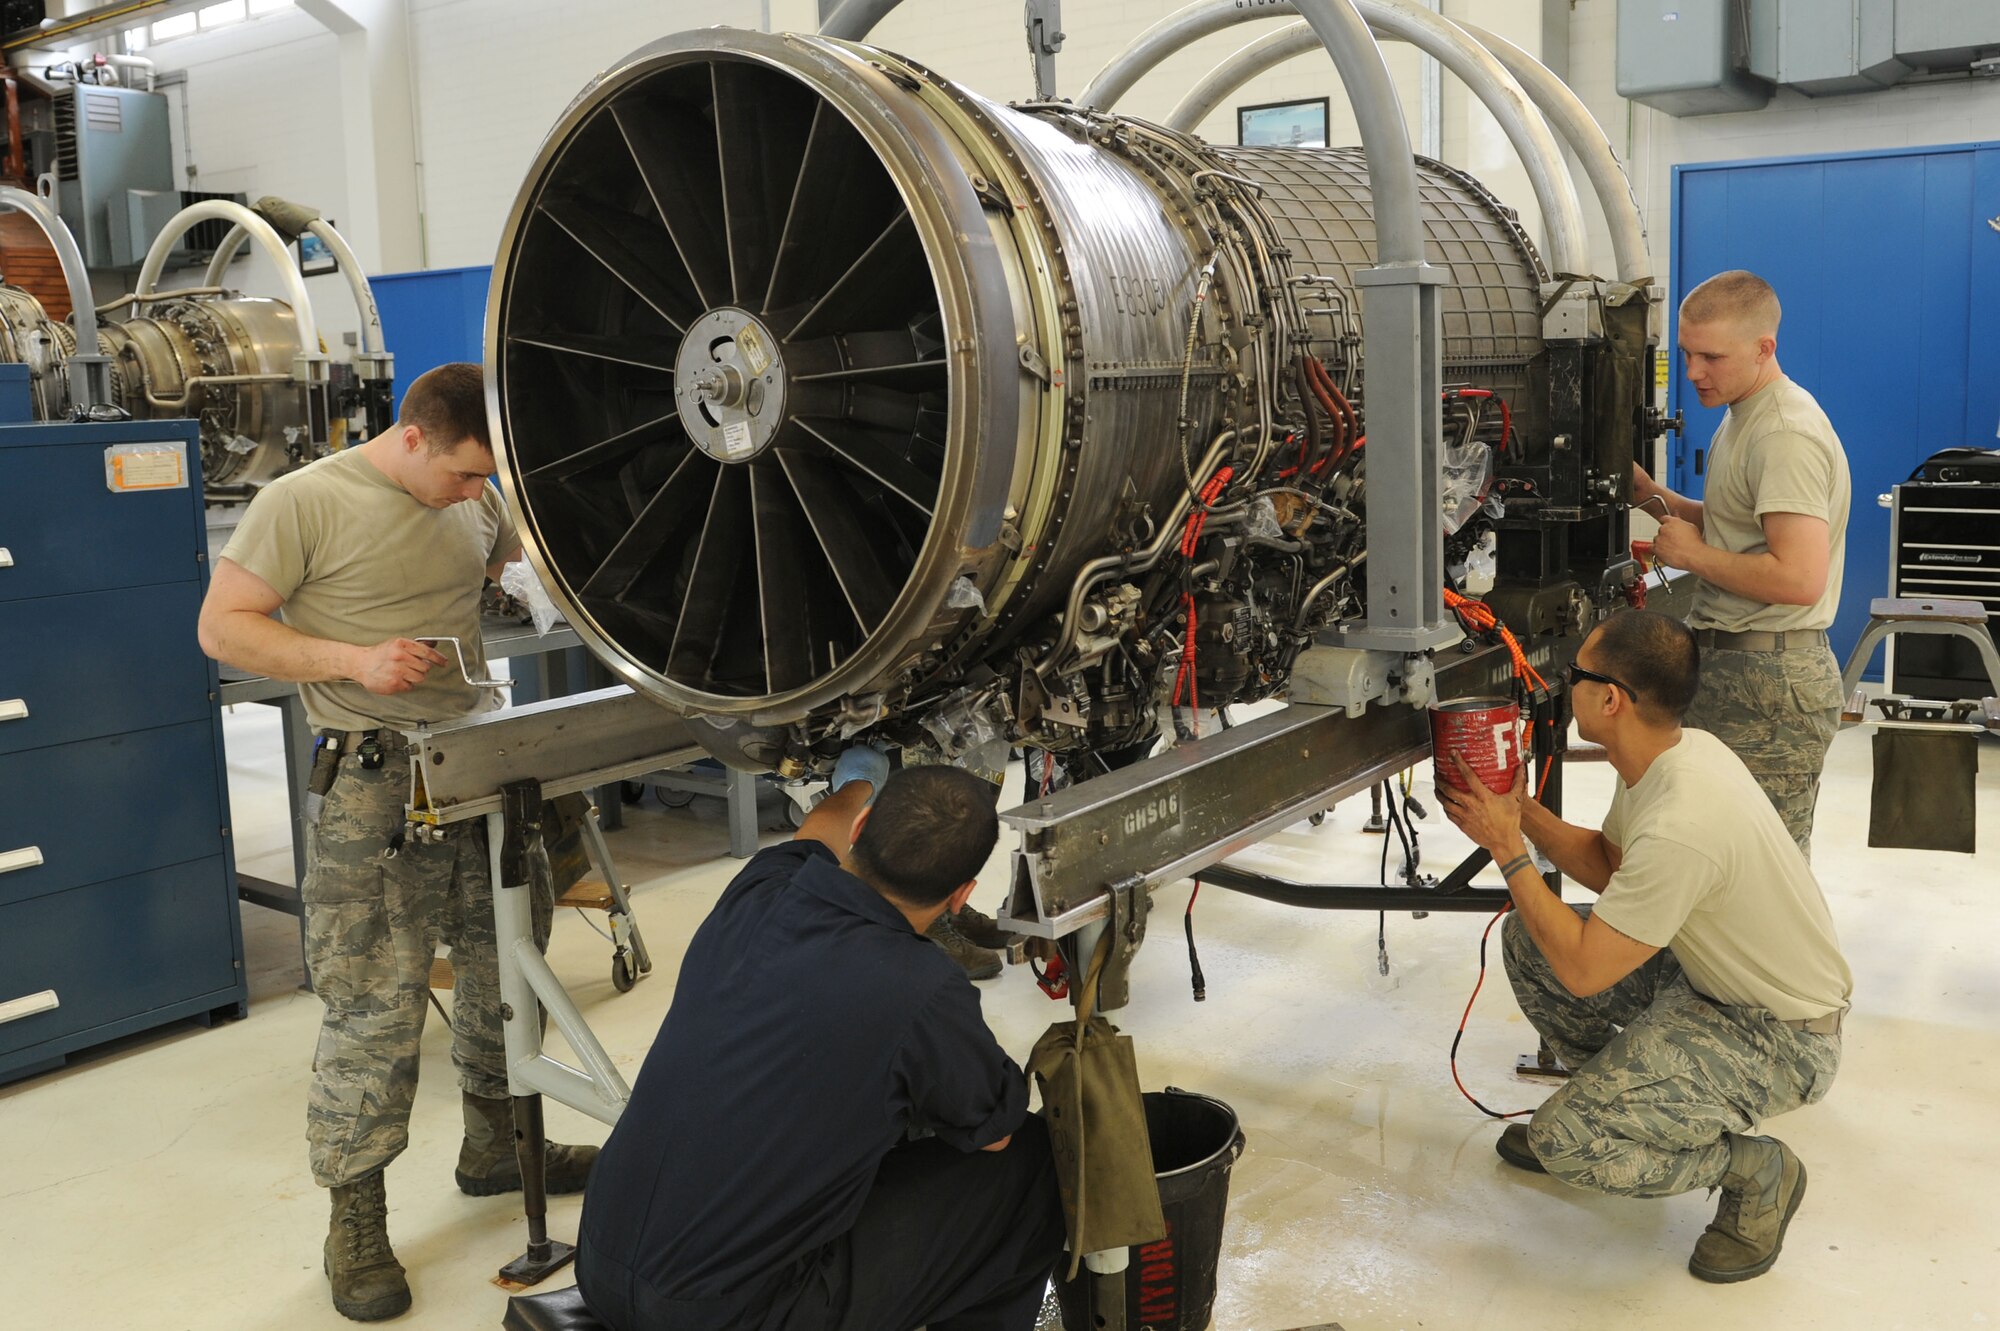 SPANGDAHLEM AIR BASE, Germany – Aerospace propulsion technicians from the 52nd Component Maintenance Squadron prepare an F-16 Fighting Falcon turbine to remove all moving parts of the engine at Bldg. 73 here April 30. Technicians replace these moving parts in a turbine every 4,000 flight hours as required by the service life extension program. CMS provides maintenance support to the 52nd Fighter Wing, the 31st FW at Aviano AB, Italy, and all U.S. F-16 units powered by F-110 engines in the European theater and deployed locations. (U.S. Air Force photo by Senior Airman Christopher Toon/Released)